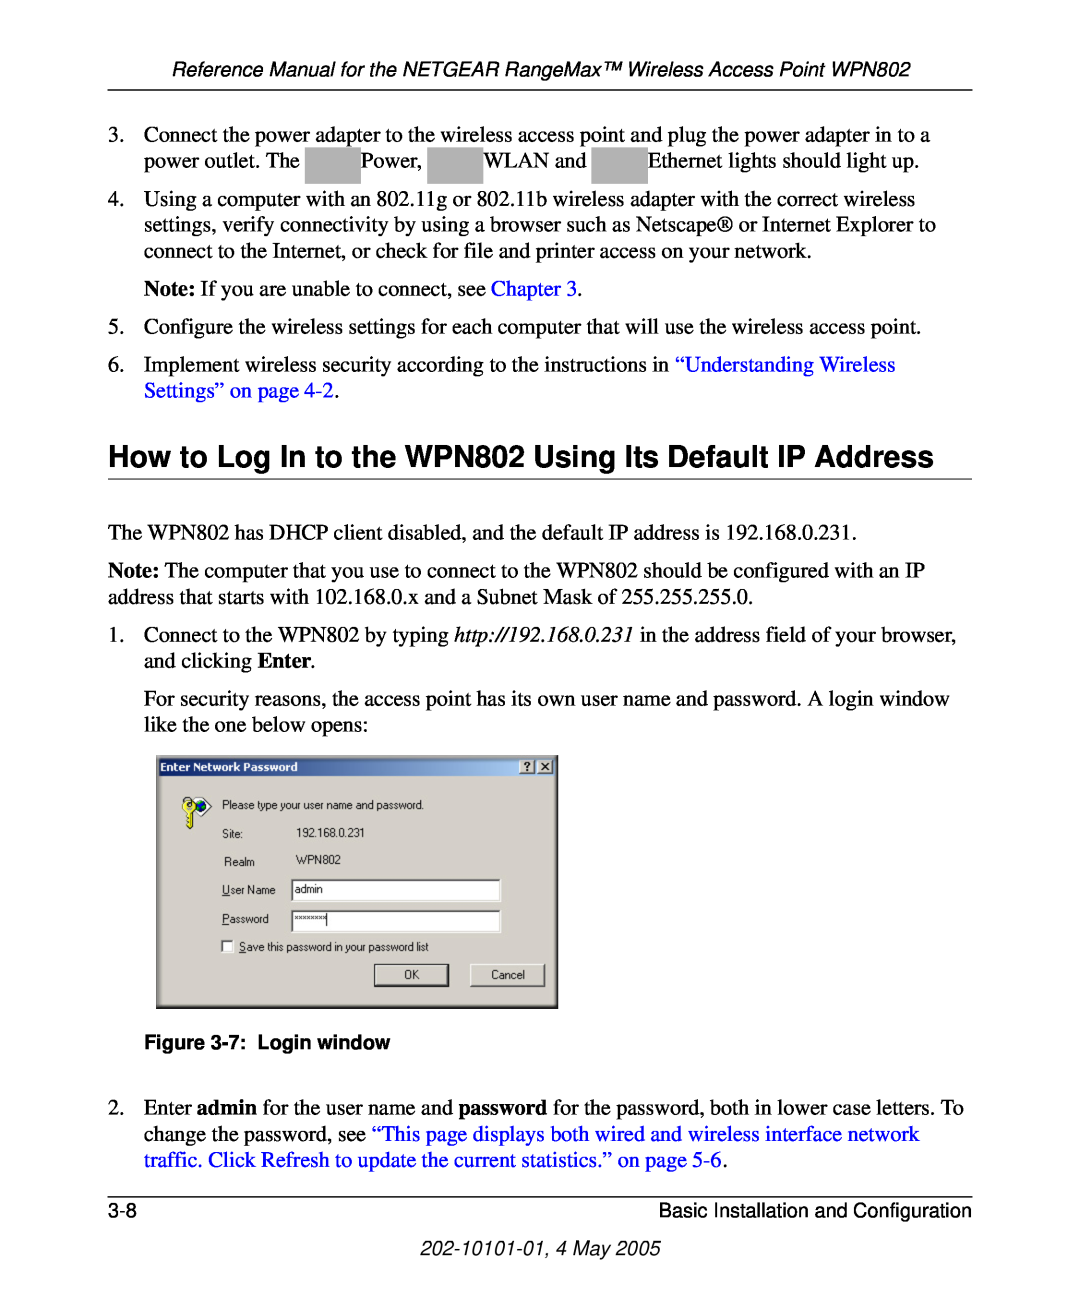 NETGEAR manual How to Log In to the WPN802 Using Its Default IP Address 